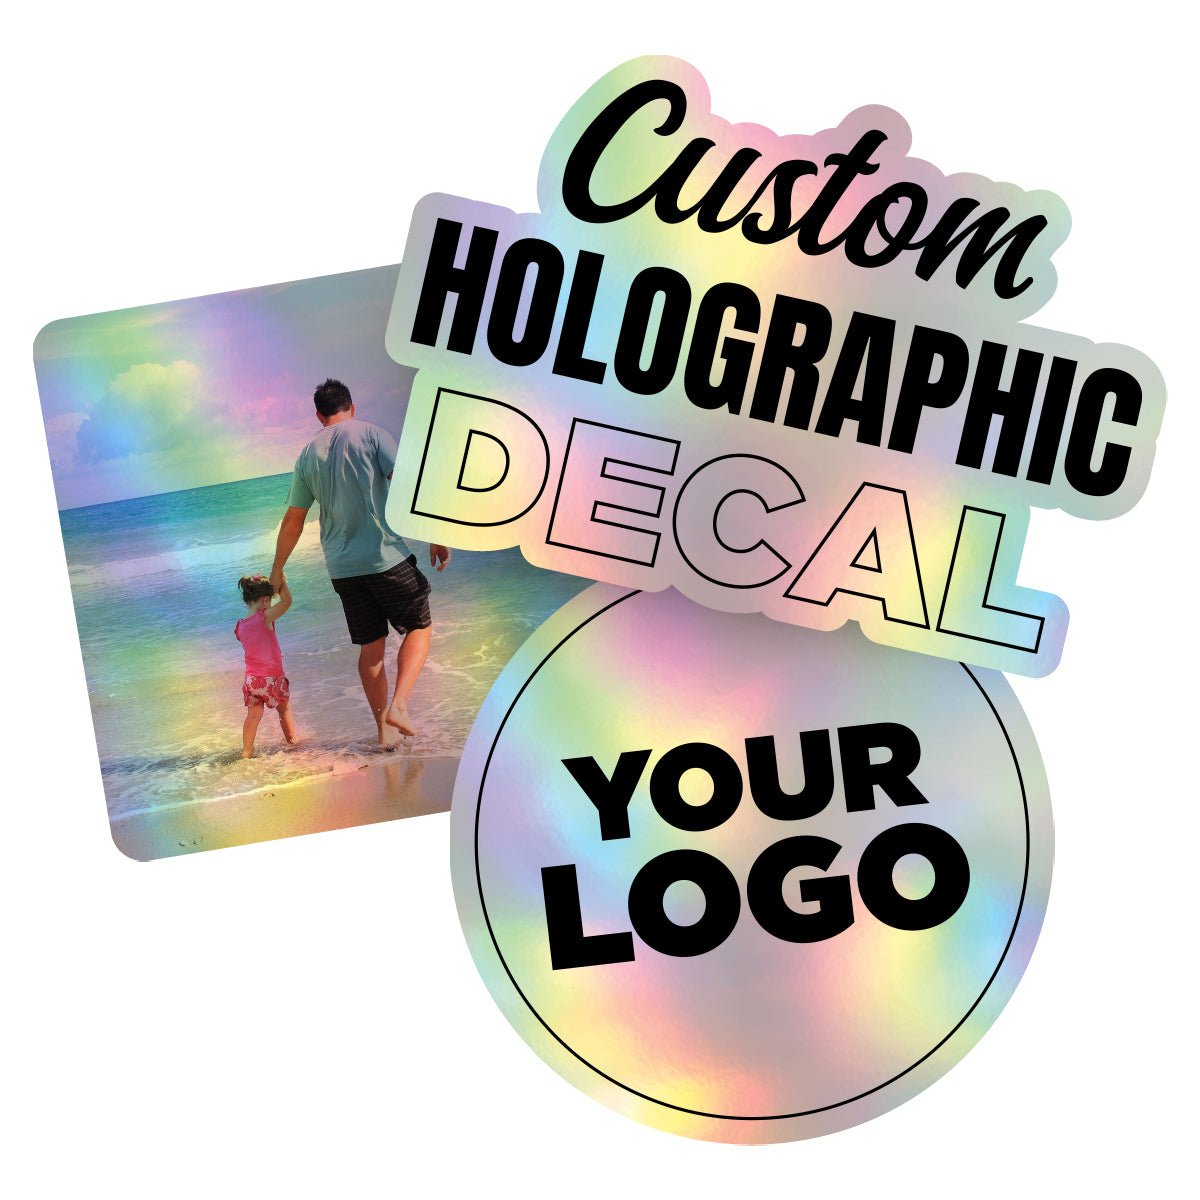 Personalized Holographic Vinyl Sticker Decal Custom Made Any Logo, Image, Text, Or Name Die Cut To Shape - 50 Pack, 6 Inch, Die Cut